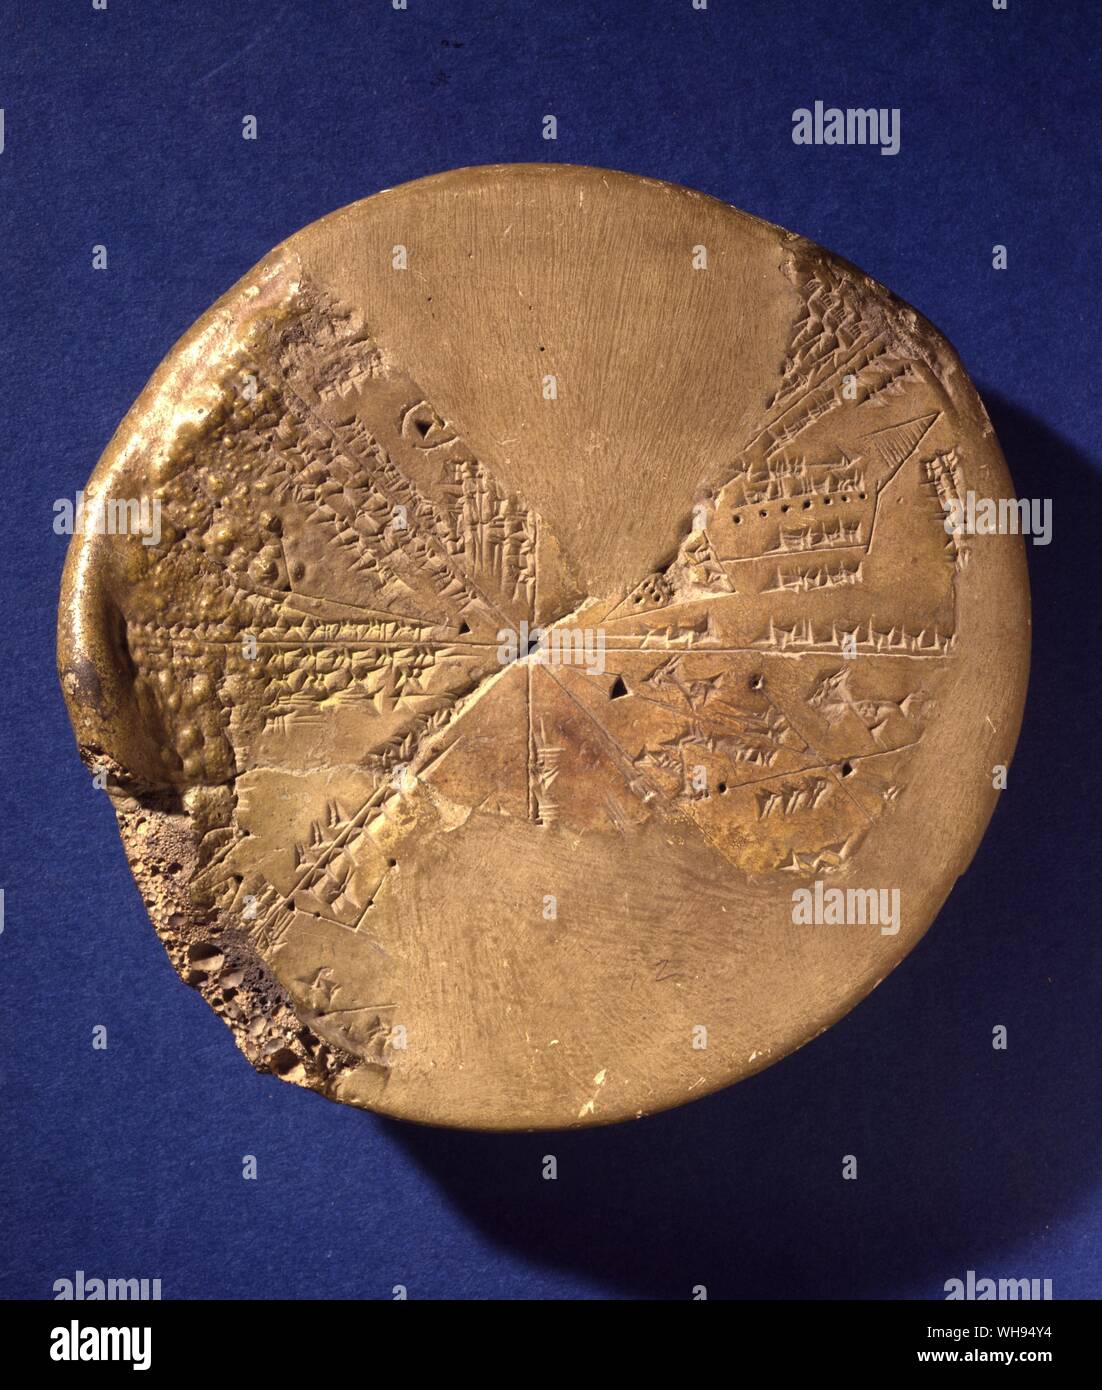 Assyrian astrolabe for making astronomical calculations. Stock Photo